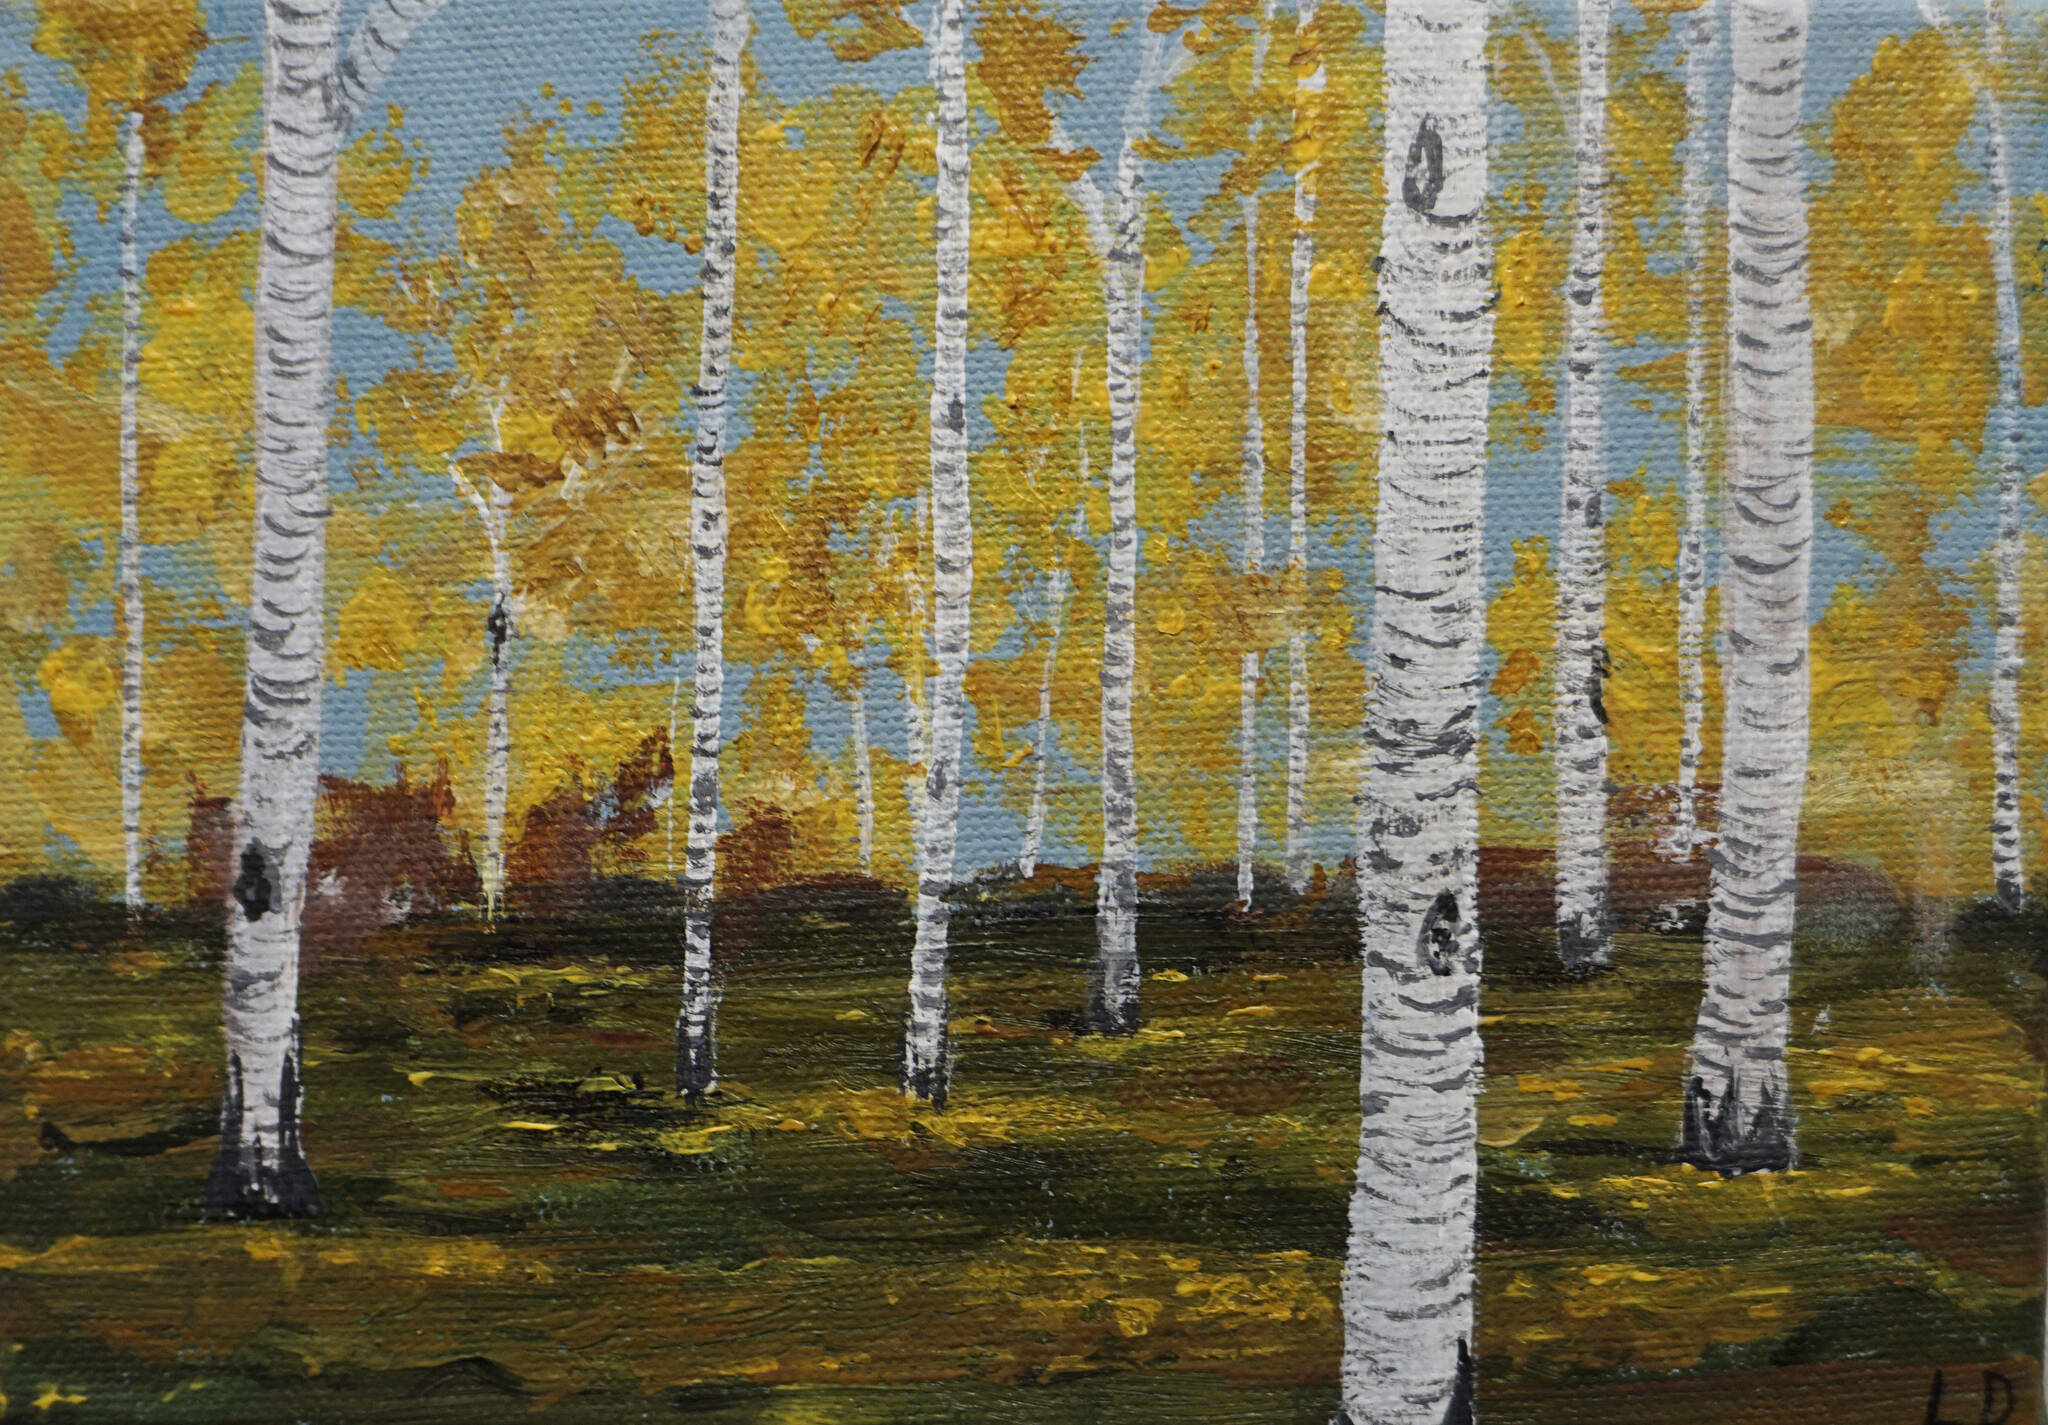 Leah Dunn’s “Birch Grove in Autumn” is one of the works showing in the Homer Council on the Arts “Fun wtih 5x7” show through Dec. 22, 2021, at the gallery in Homer, Alaska. (Photo by Michael Armstrong/Homer News)